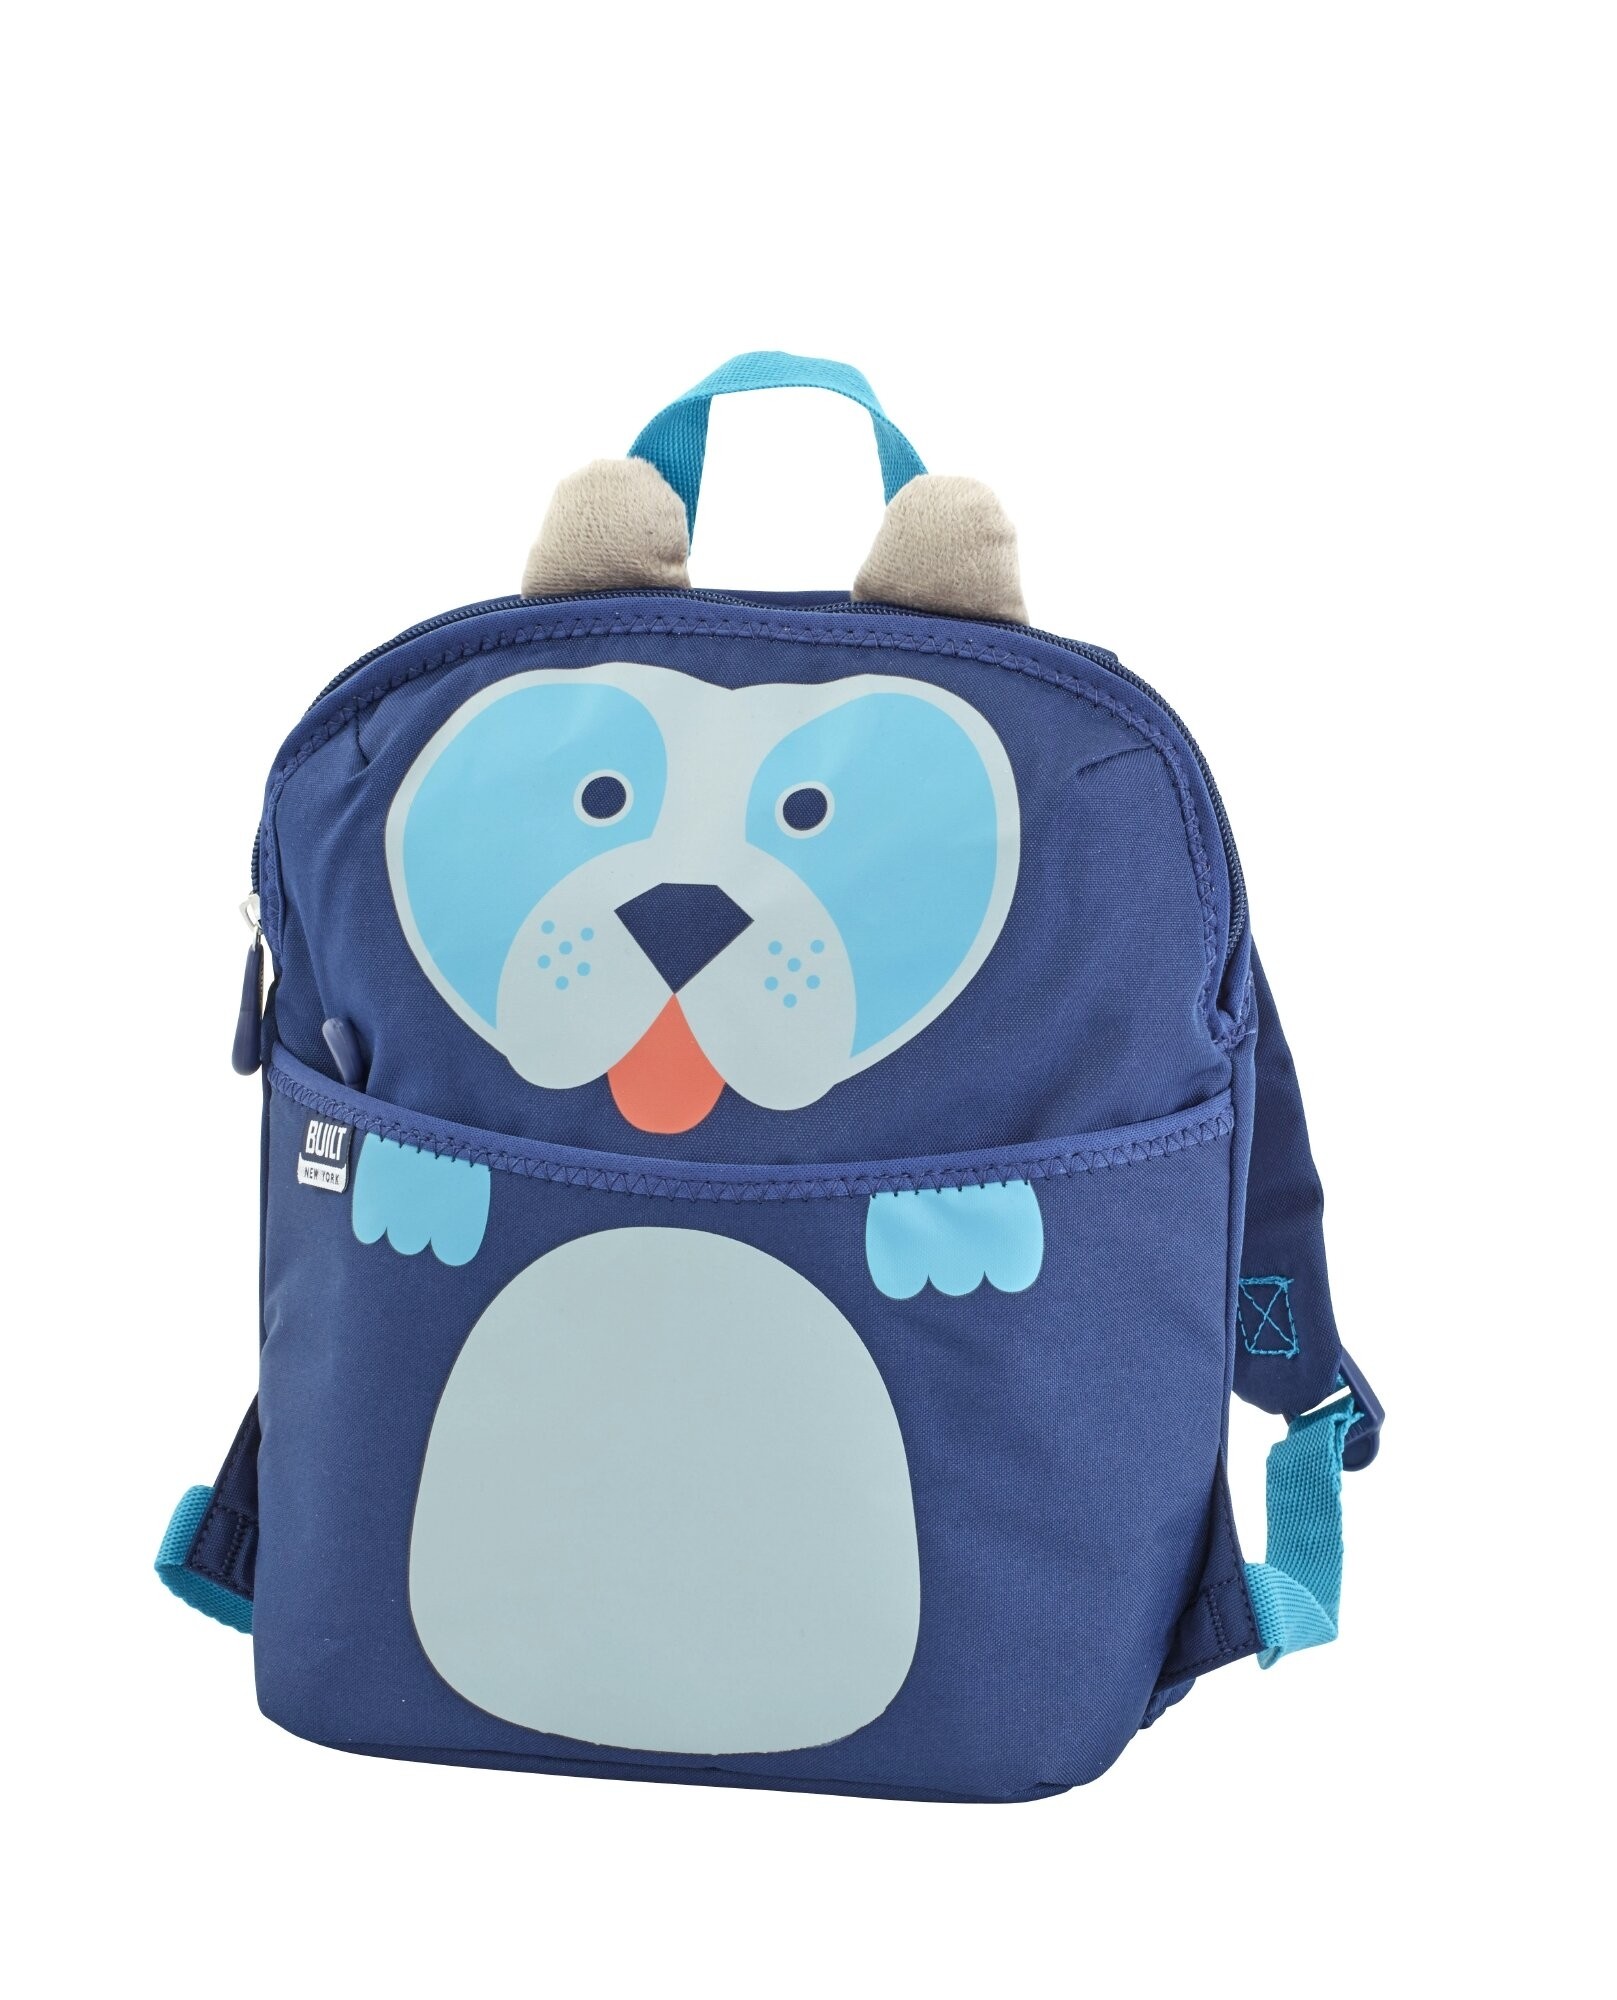 Dog Lunch Picnic Backpack